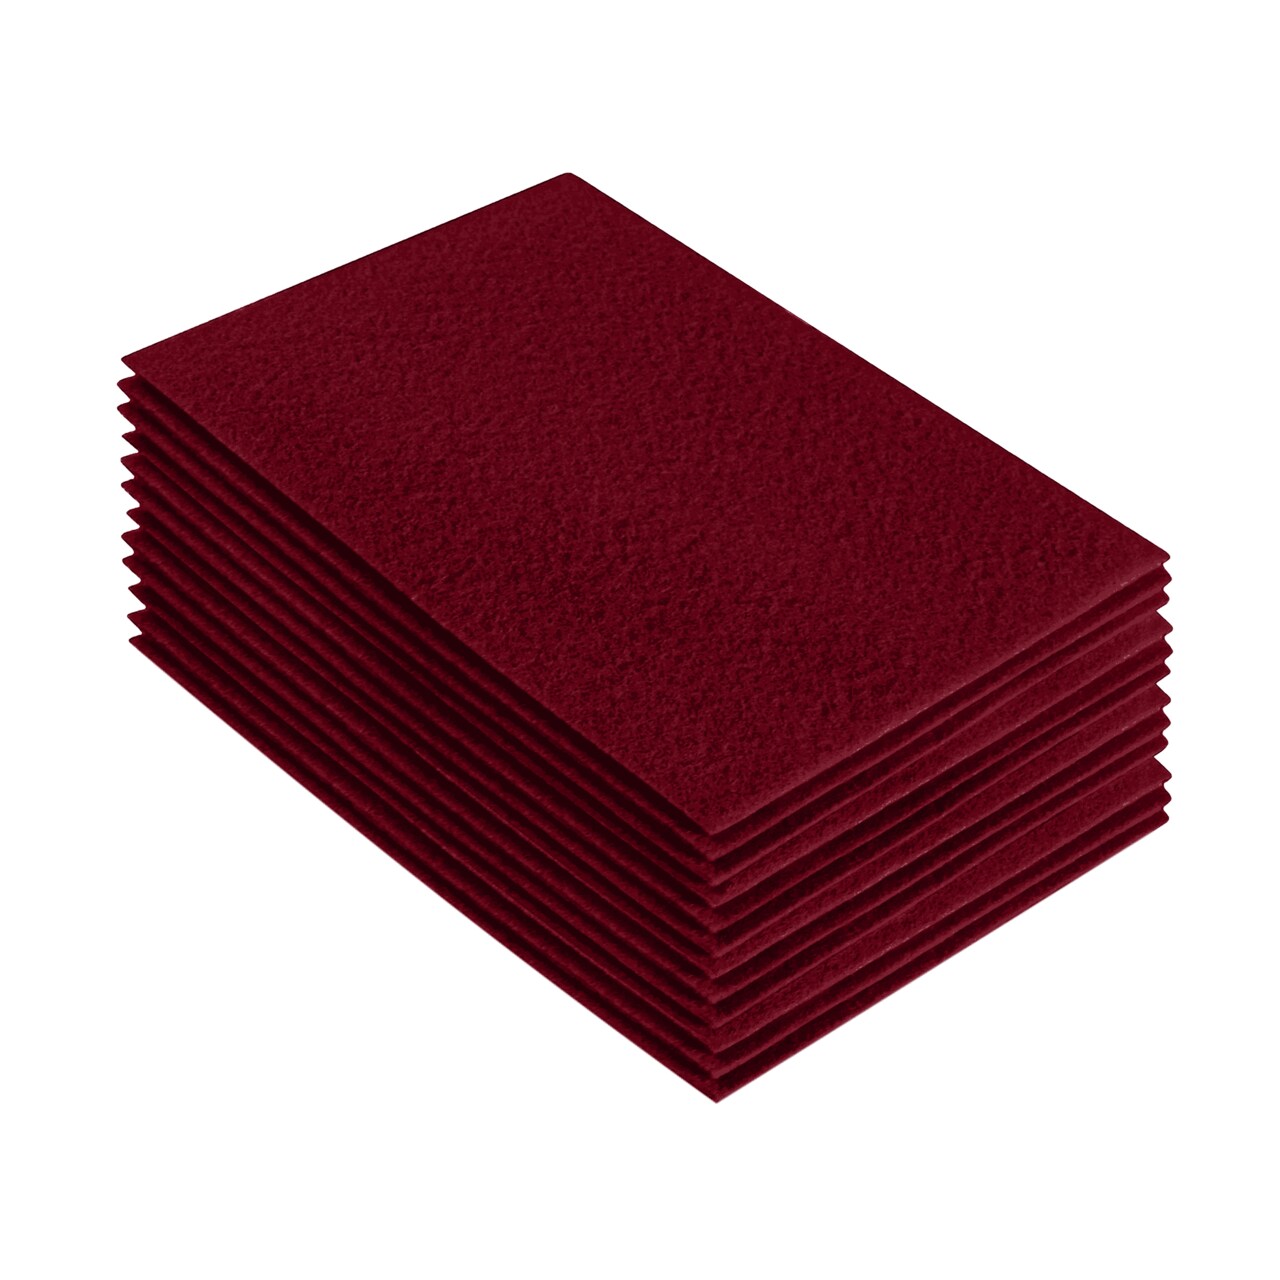 FabricLA Acrylic Felt Sheets for Crafts - Precut 9 X 12 Inches (20 cm X  30 cm) Felt Squares - Use Felt Fabric Craft Sheets for DIY, Hobby, Costume,  and Decoration, Red